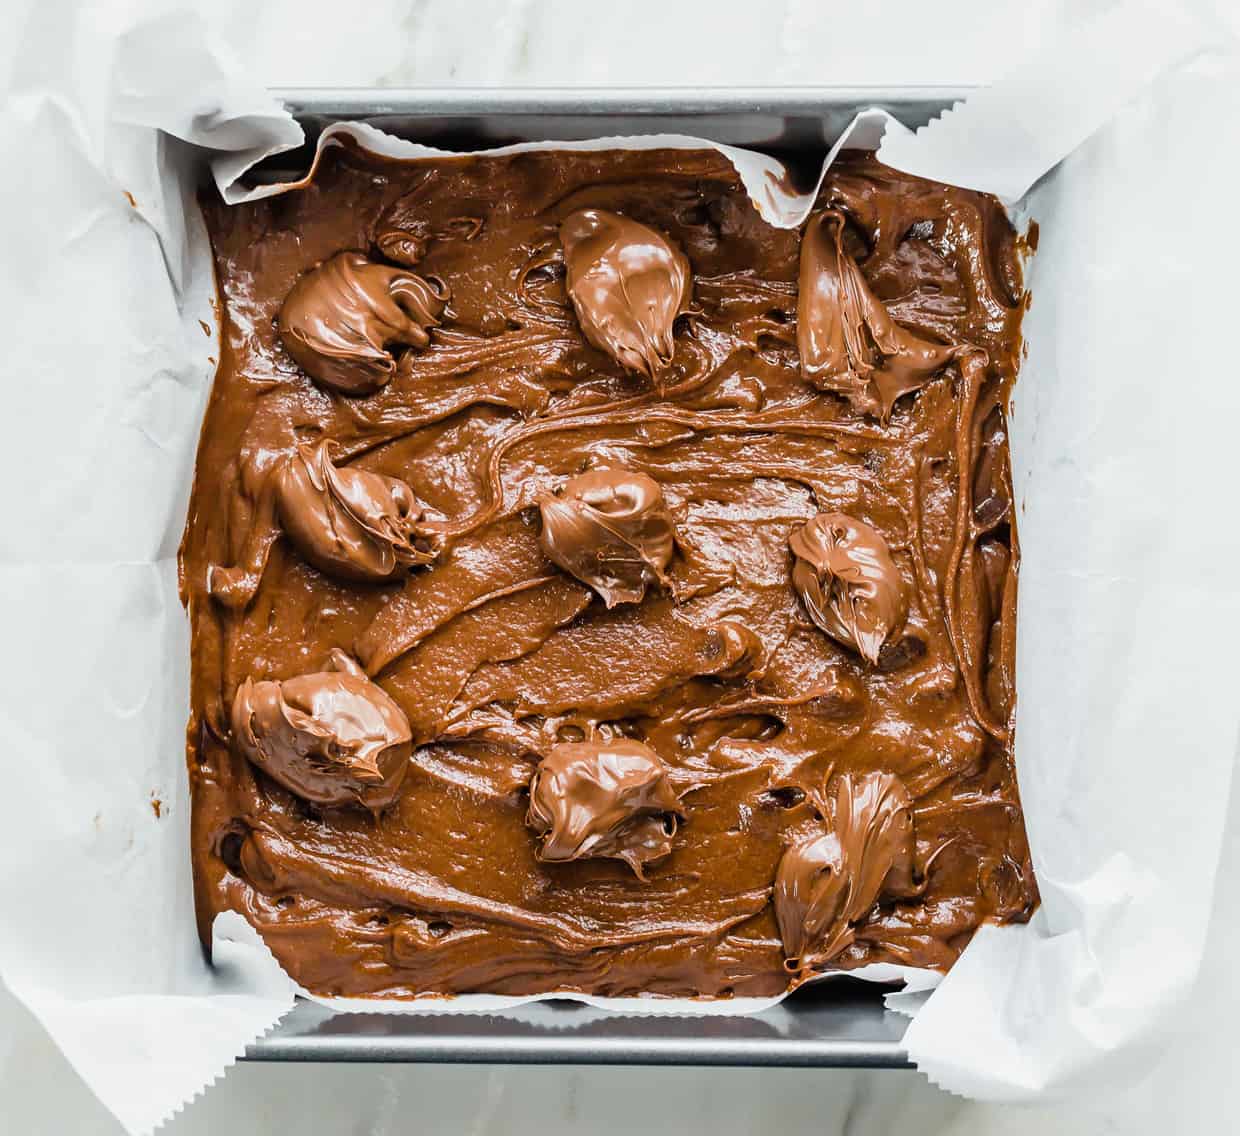 Nutella Brownie batter in an 8x8 pan, with dollops of Nutella along the top.